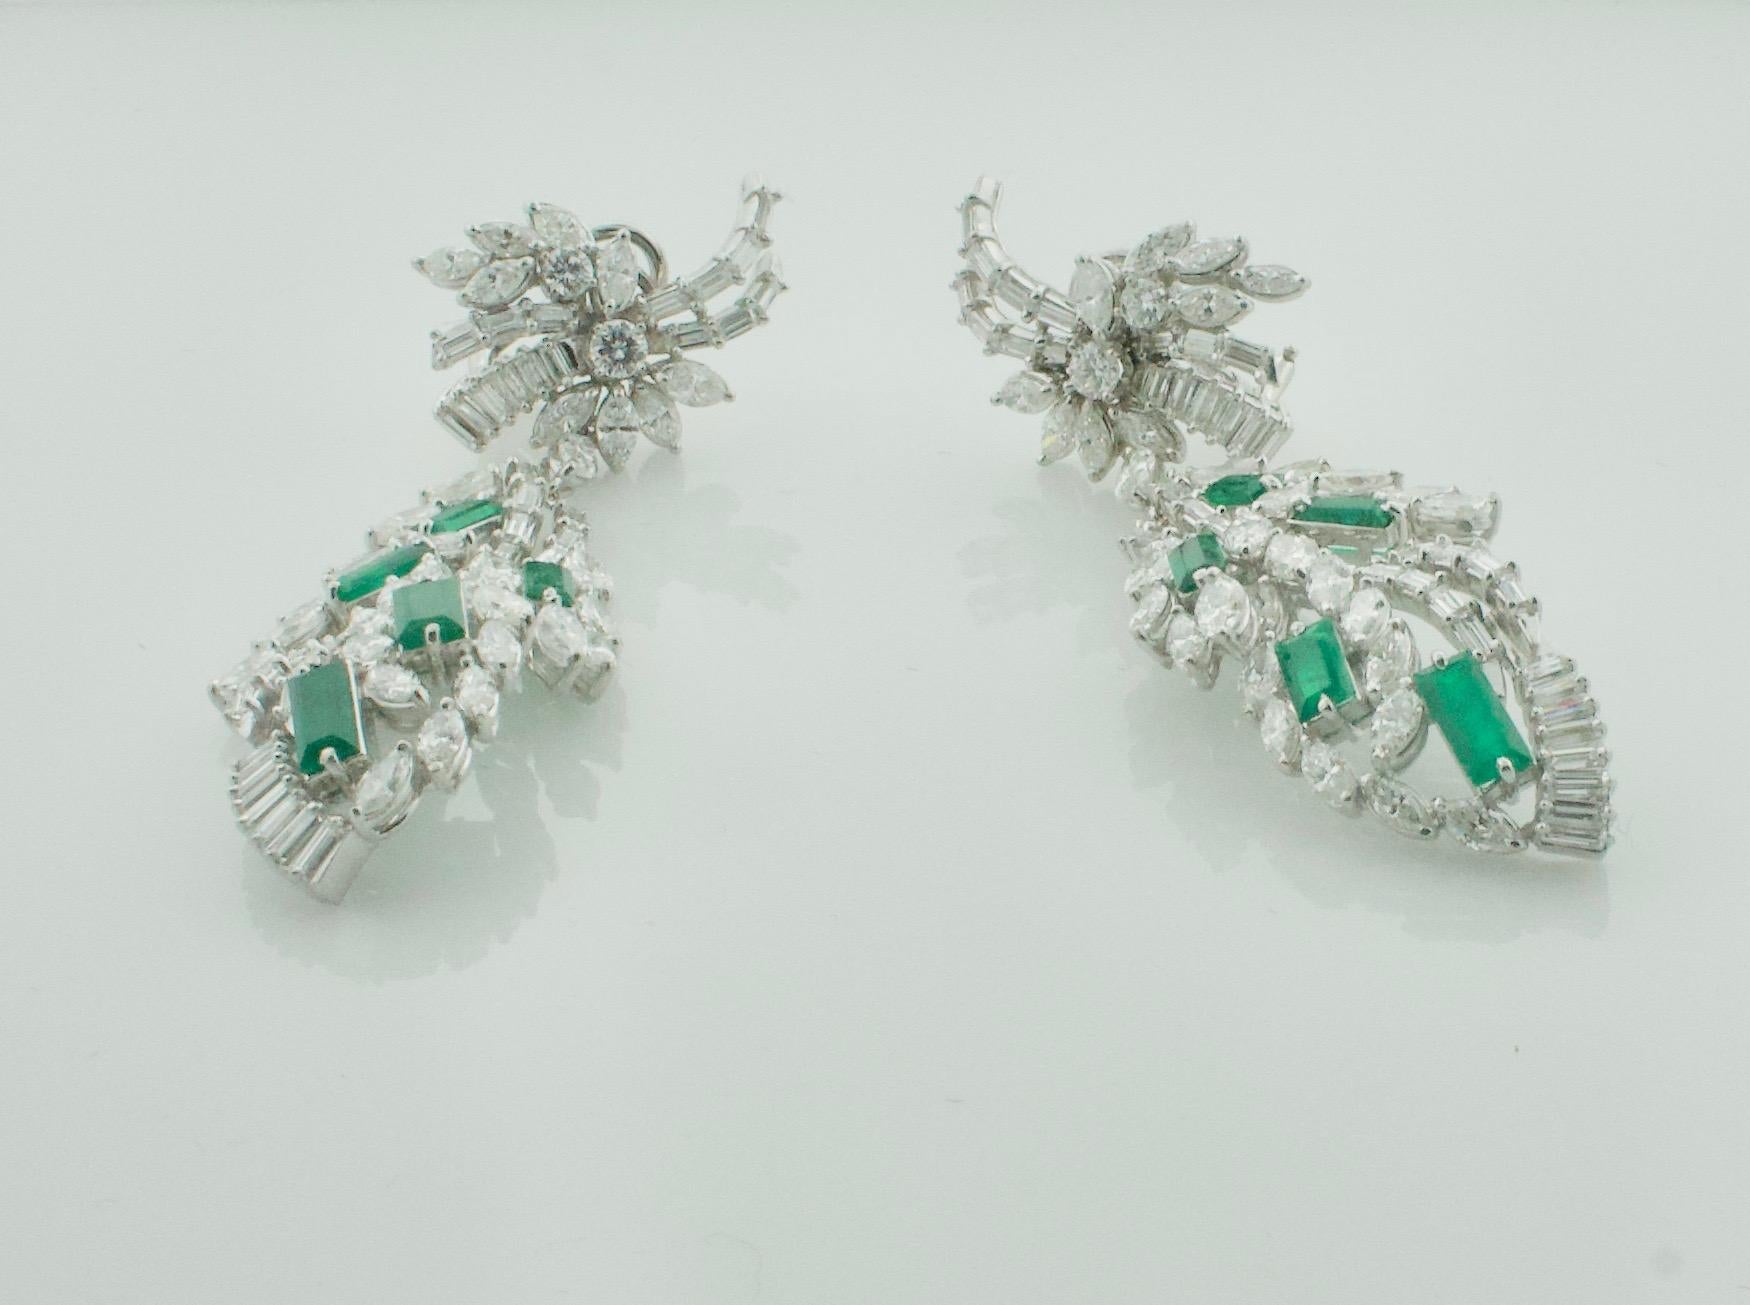 Circa 1950's Dangling Diamond and Emerald Earrings in Platinum
10 Baguette Cut Emeralds Weighing 2.00 Carats Approximately [bright with no imperfections visible to the naked eye]
4 Round Brilliant Cut Diamonds Weighing .50 Carats Approximately 
68